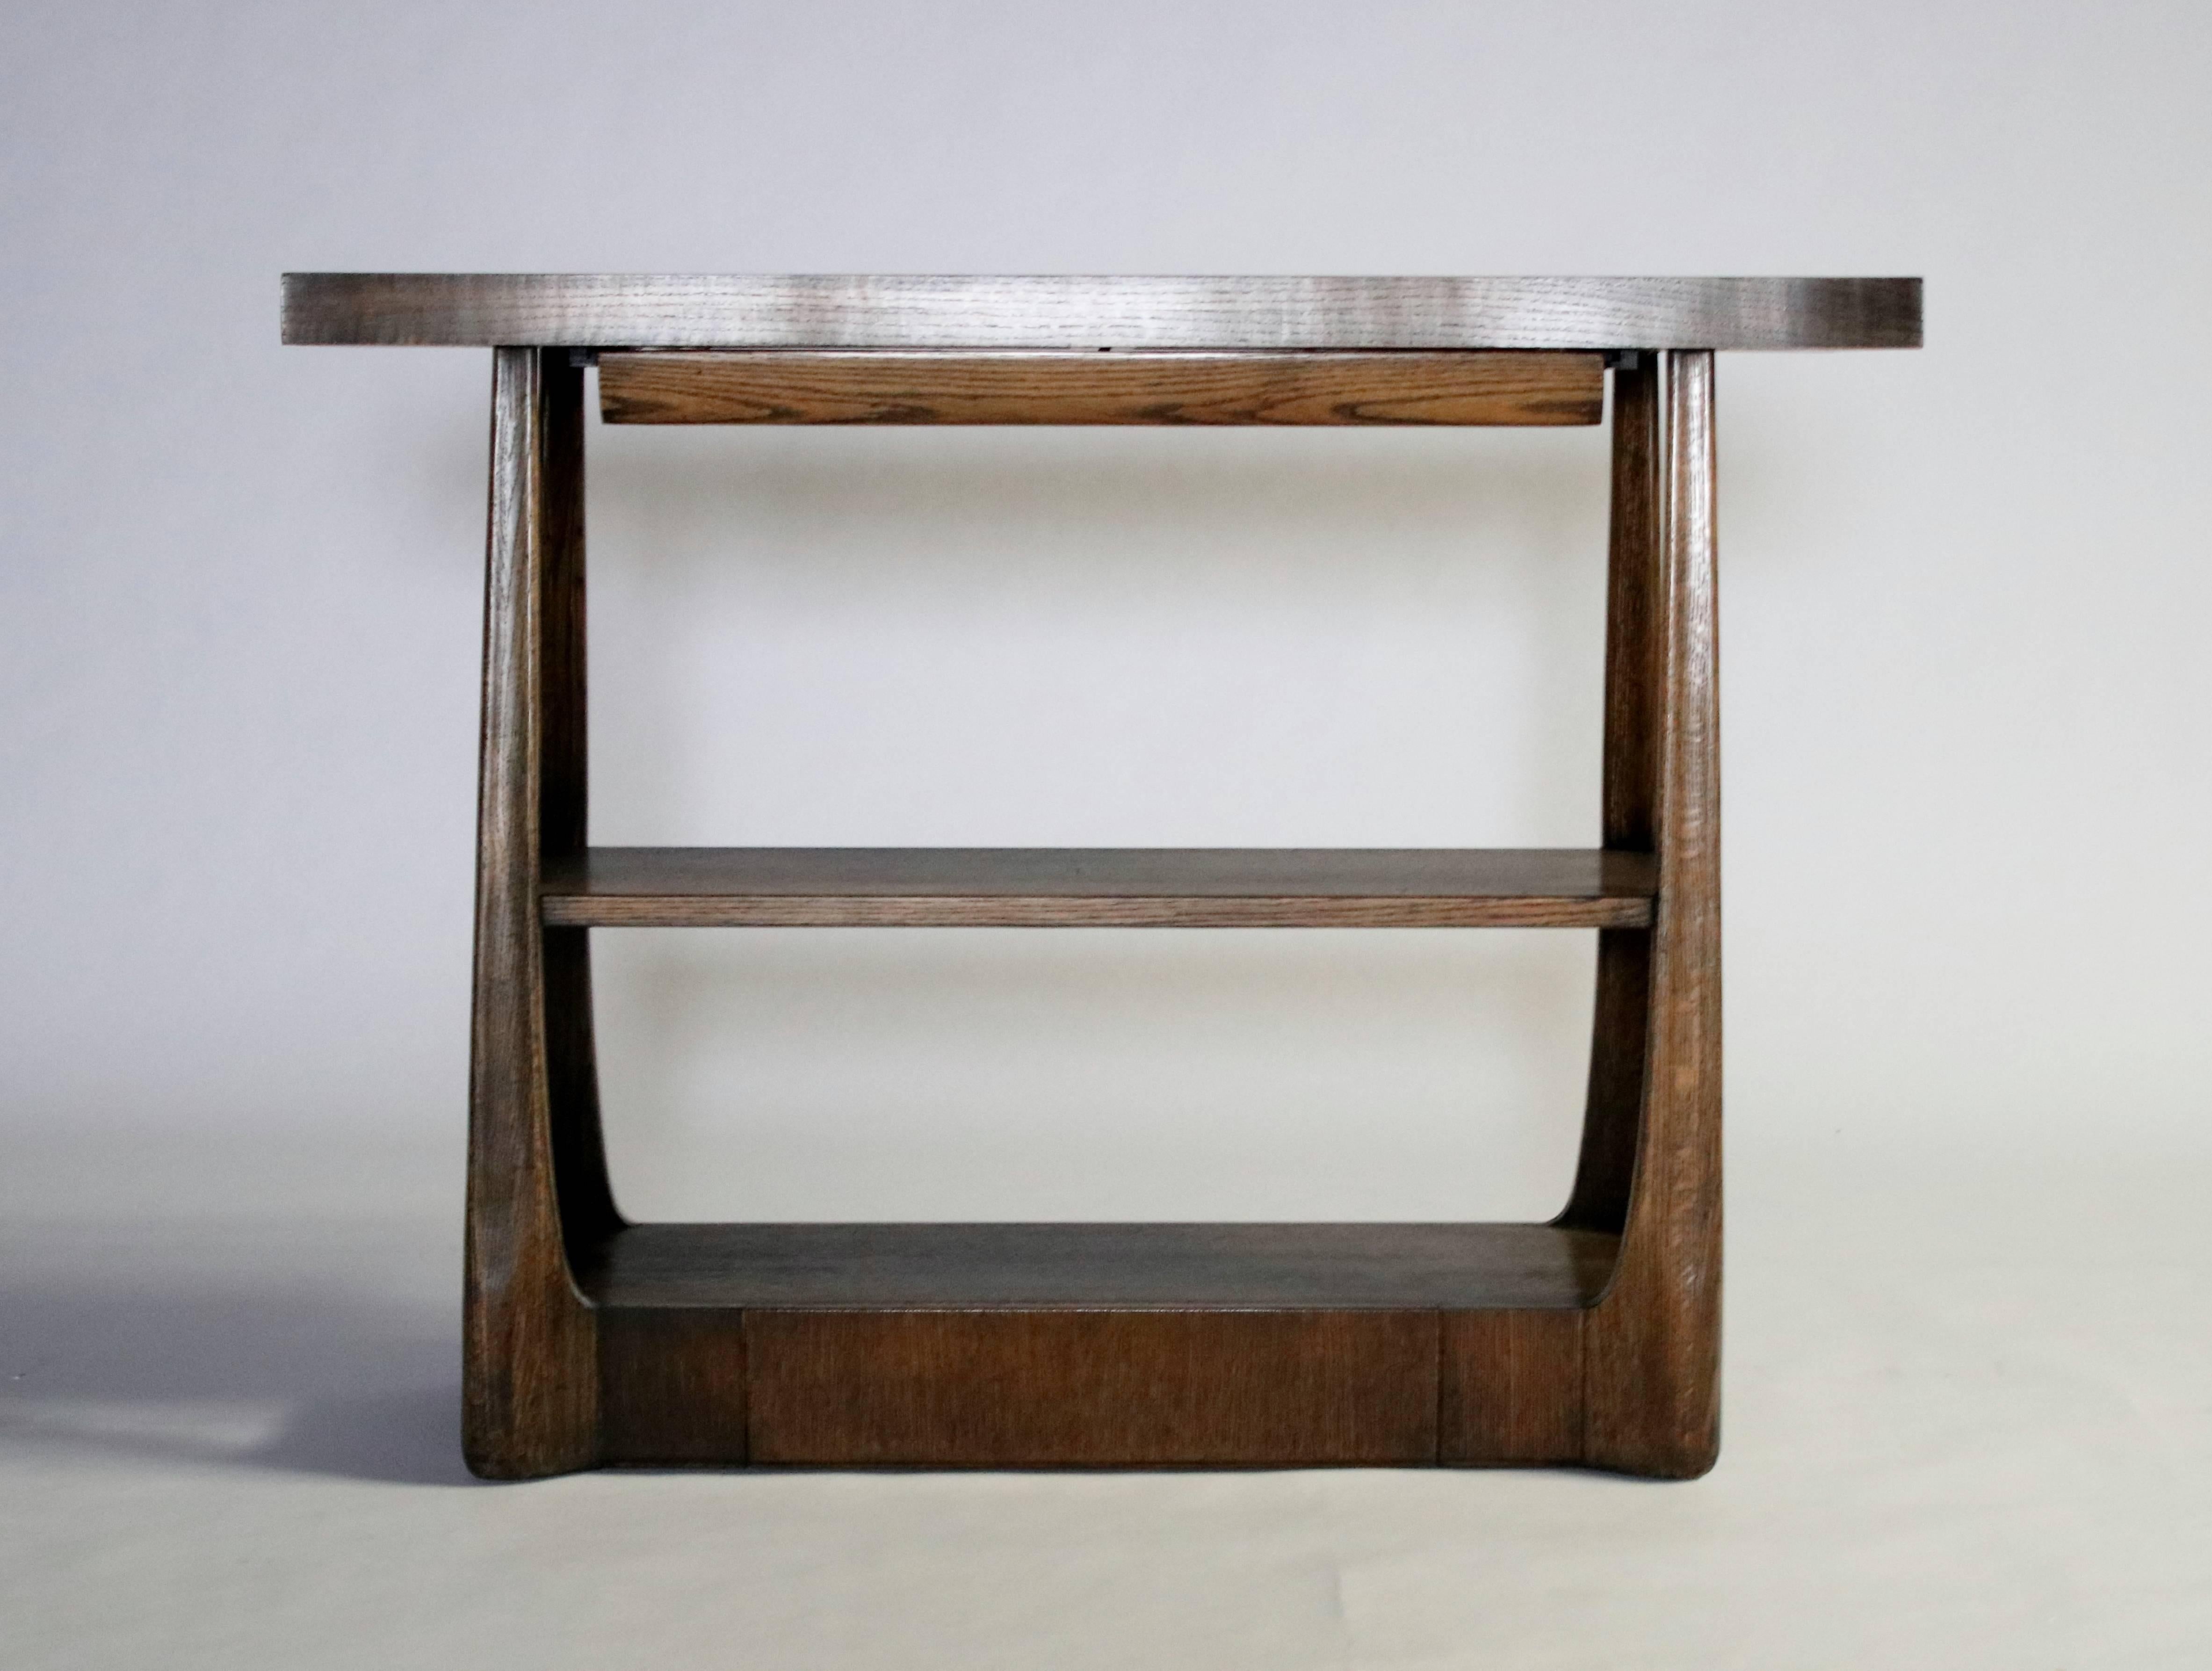 Harold Schwartz server model #M-749 for Romweber Originals in Modern series, 1955 in a walnut stained oak. Top, when extended, reveals a sunken copper tray. Two pull-out drawers including a utensil drawer under the top and a bottom drawer concealed